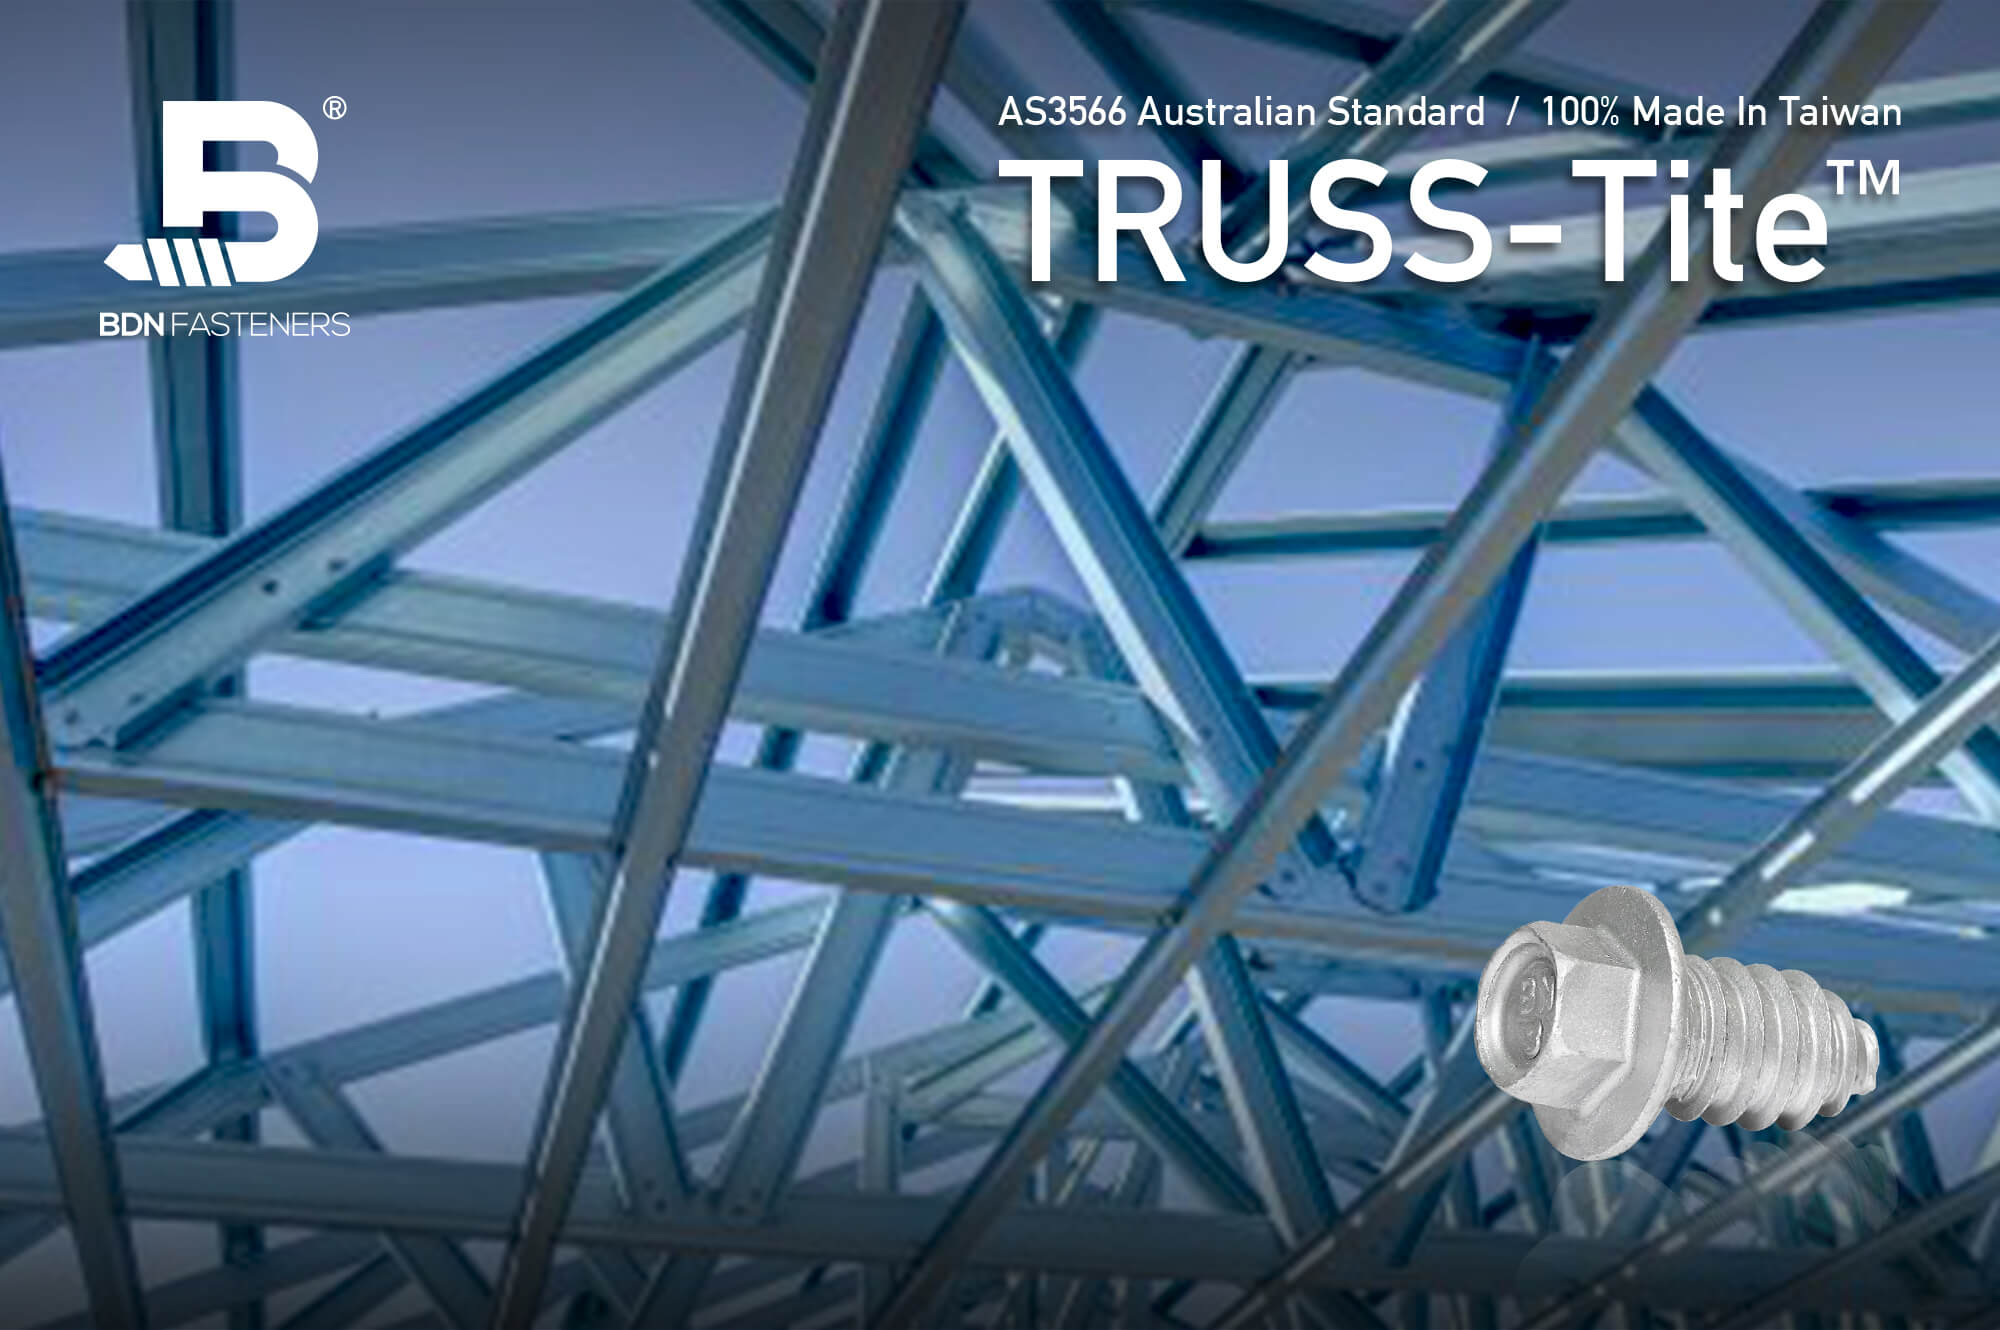 TRUSS-Tite™ truss screw is designed for the assembly of truss